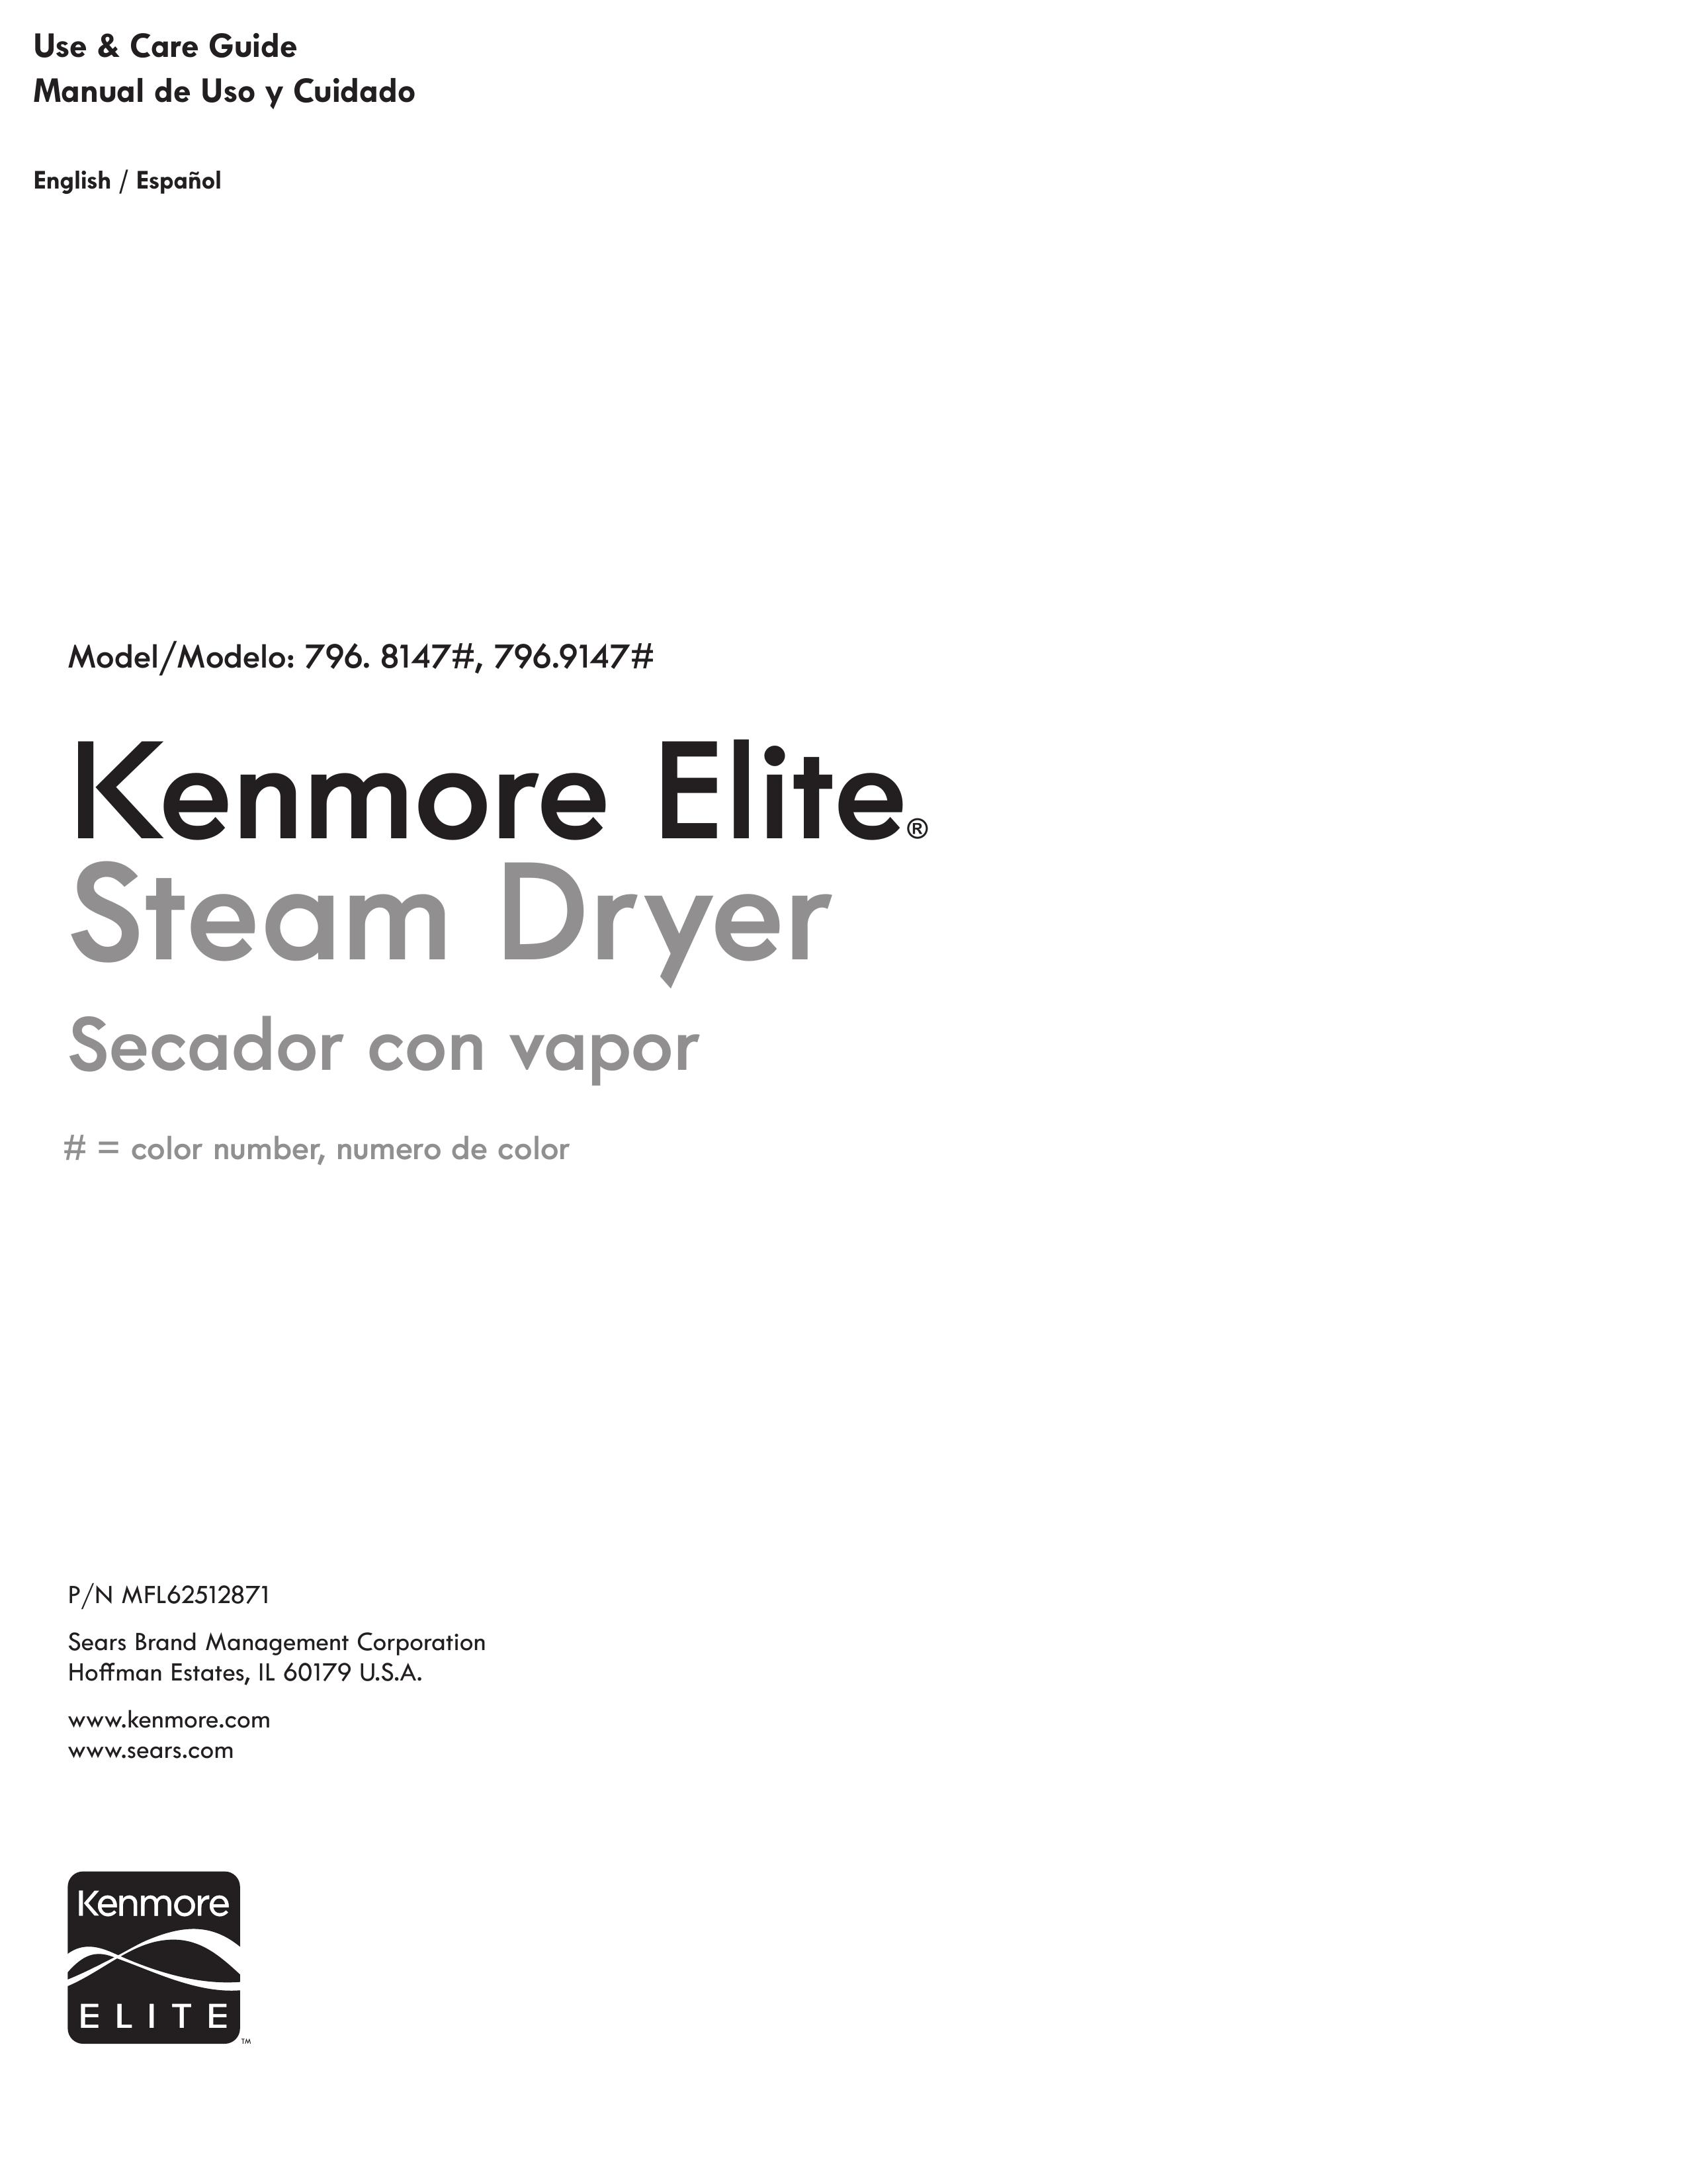 Kenmore 796.9147# Clothes Dryer User Manual